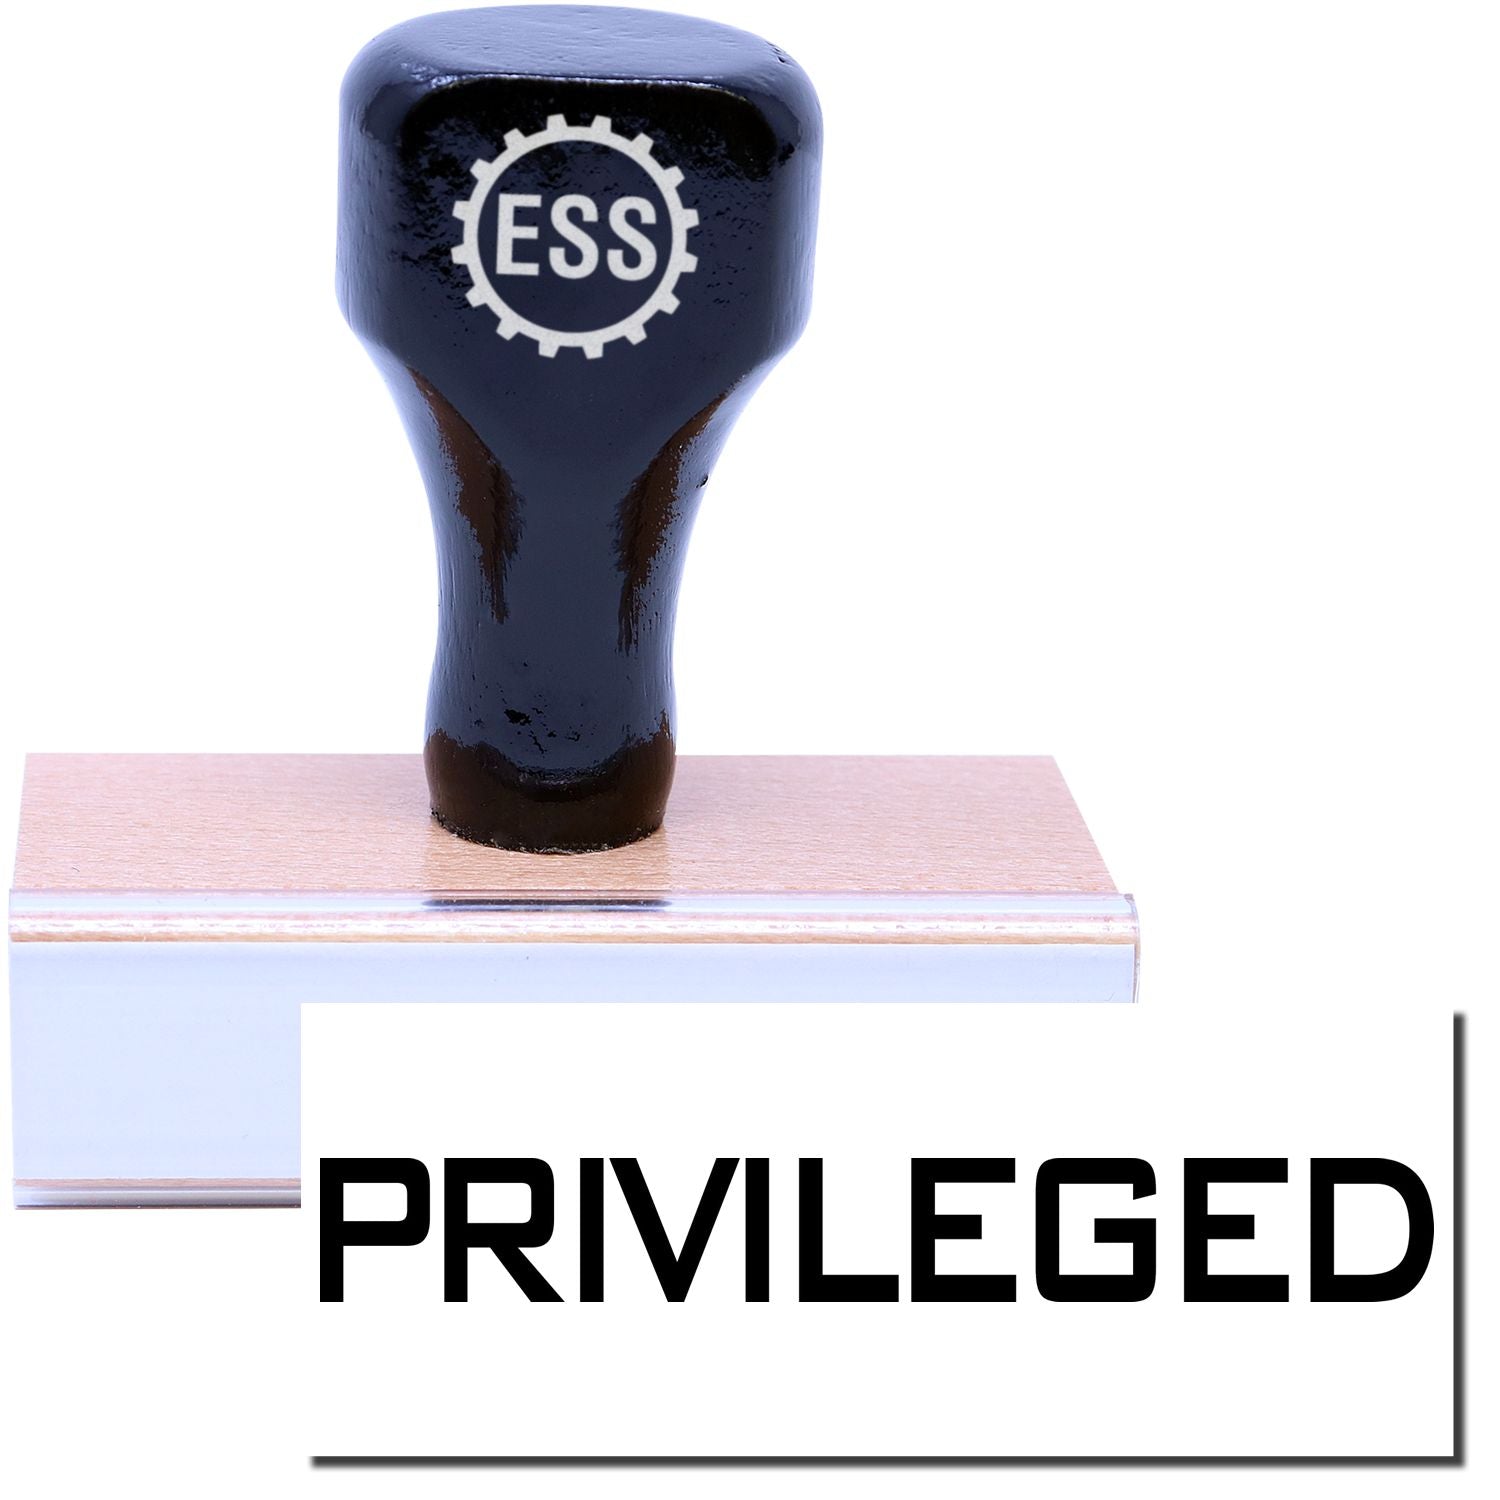 A stock office rubber stamp with a stamped image showing how the text "PRIVILEGED" is displayed after stamping.